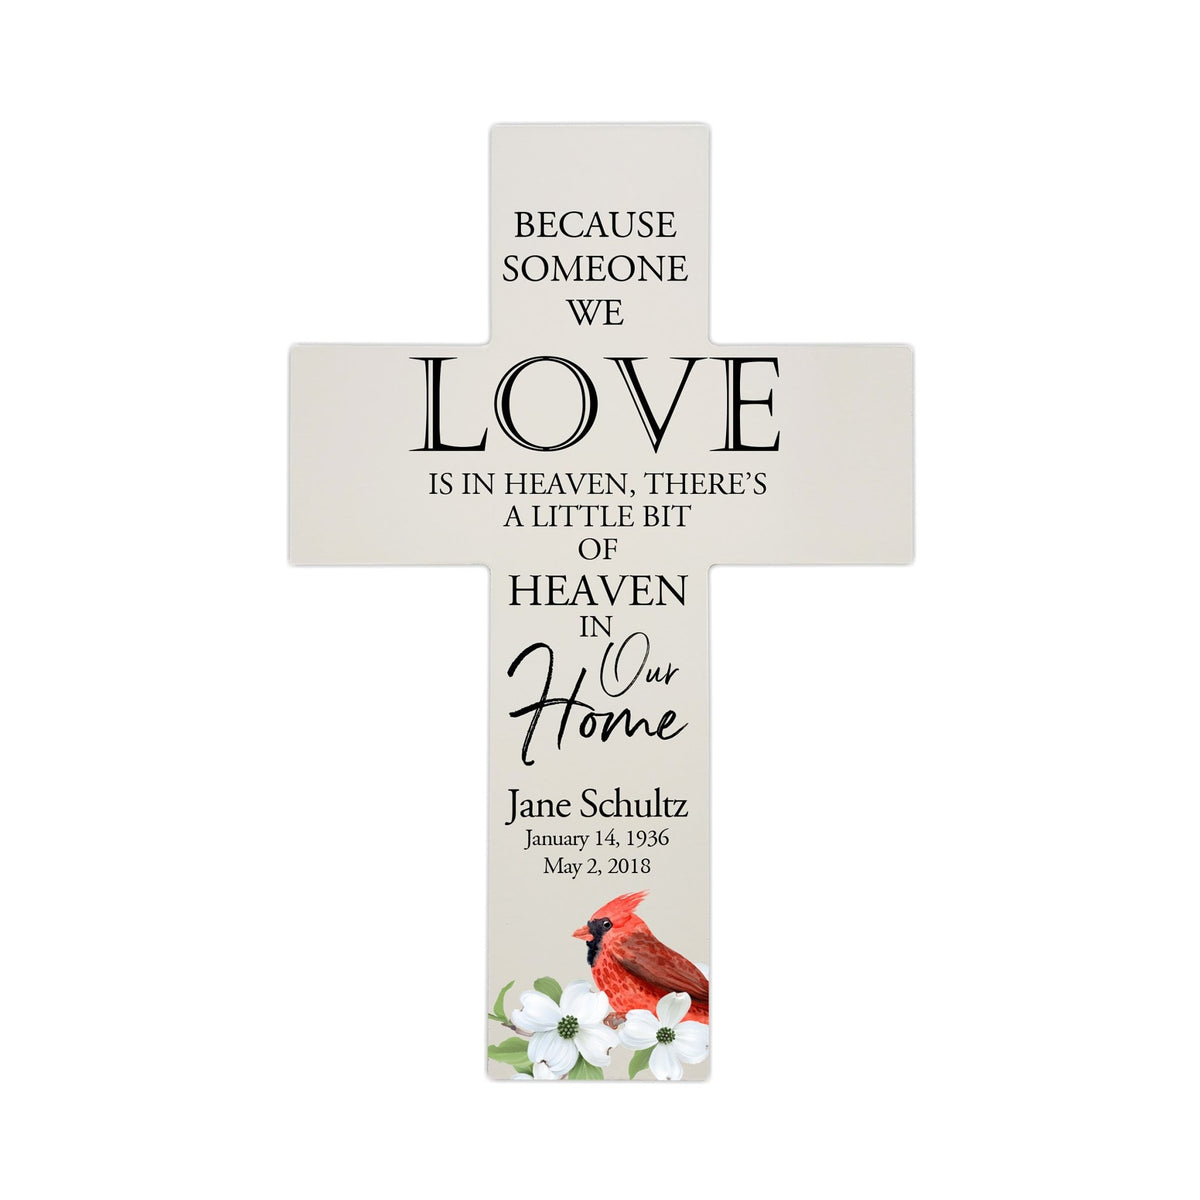 Personalized Red Cardinal Memorial Bereavement Wall Cross For Loss of Loved One Because Someone We Love (Cardinal) Quote 14 x 9.25 Because Someone We Love Is In Heaven, There&#39;s A Little Bit Of Heaven In Our Home - LifeSong Milestones